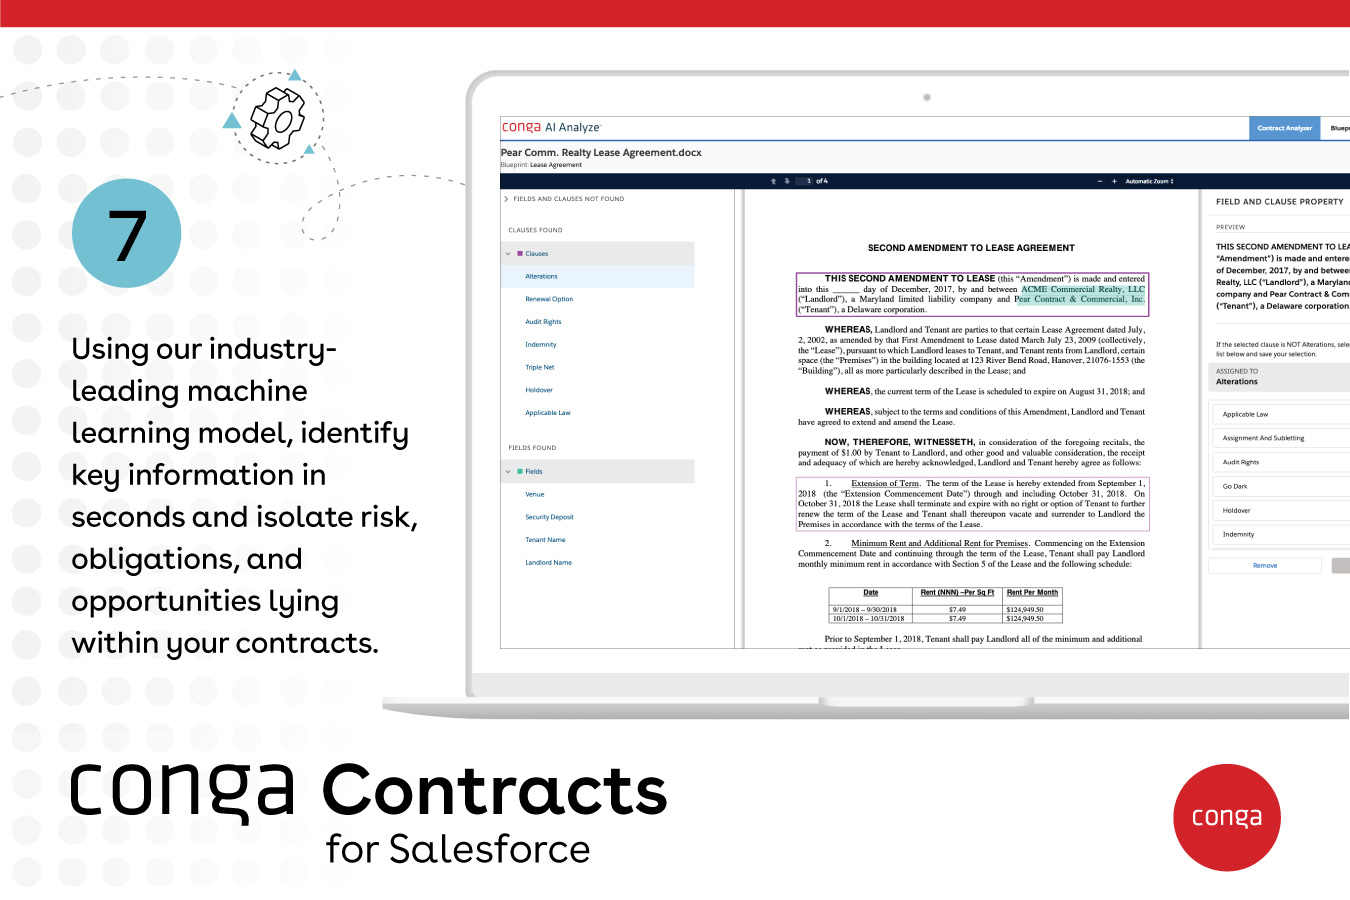 legacy contracts have never been easier to analyze